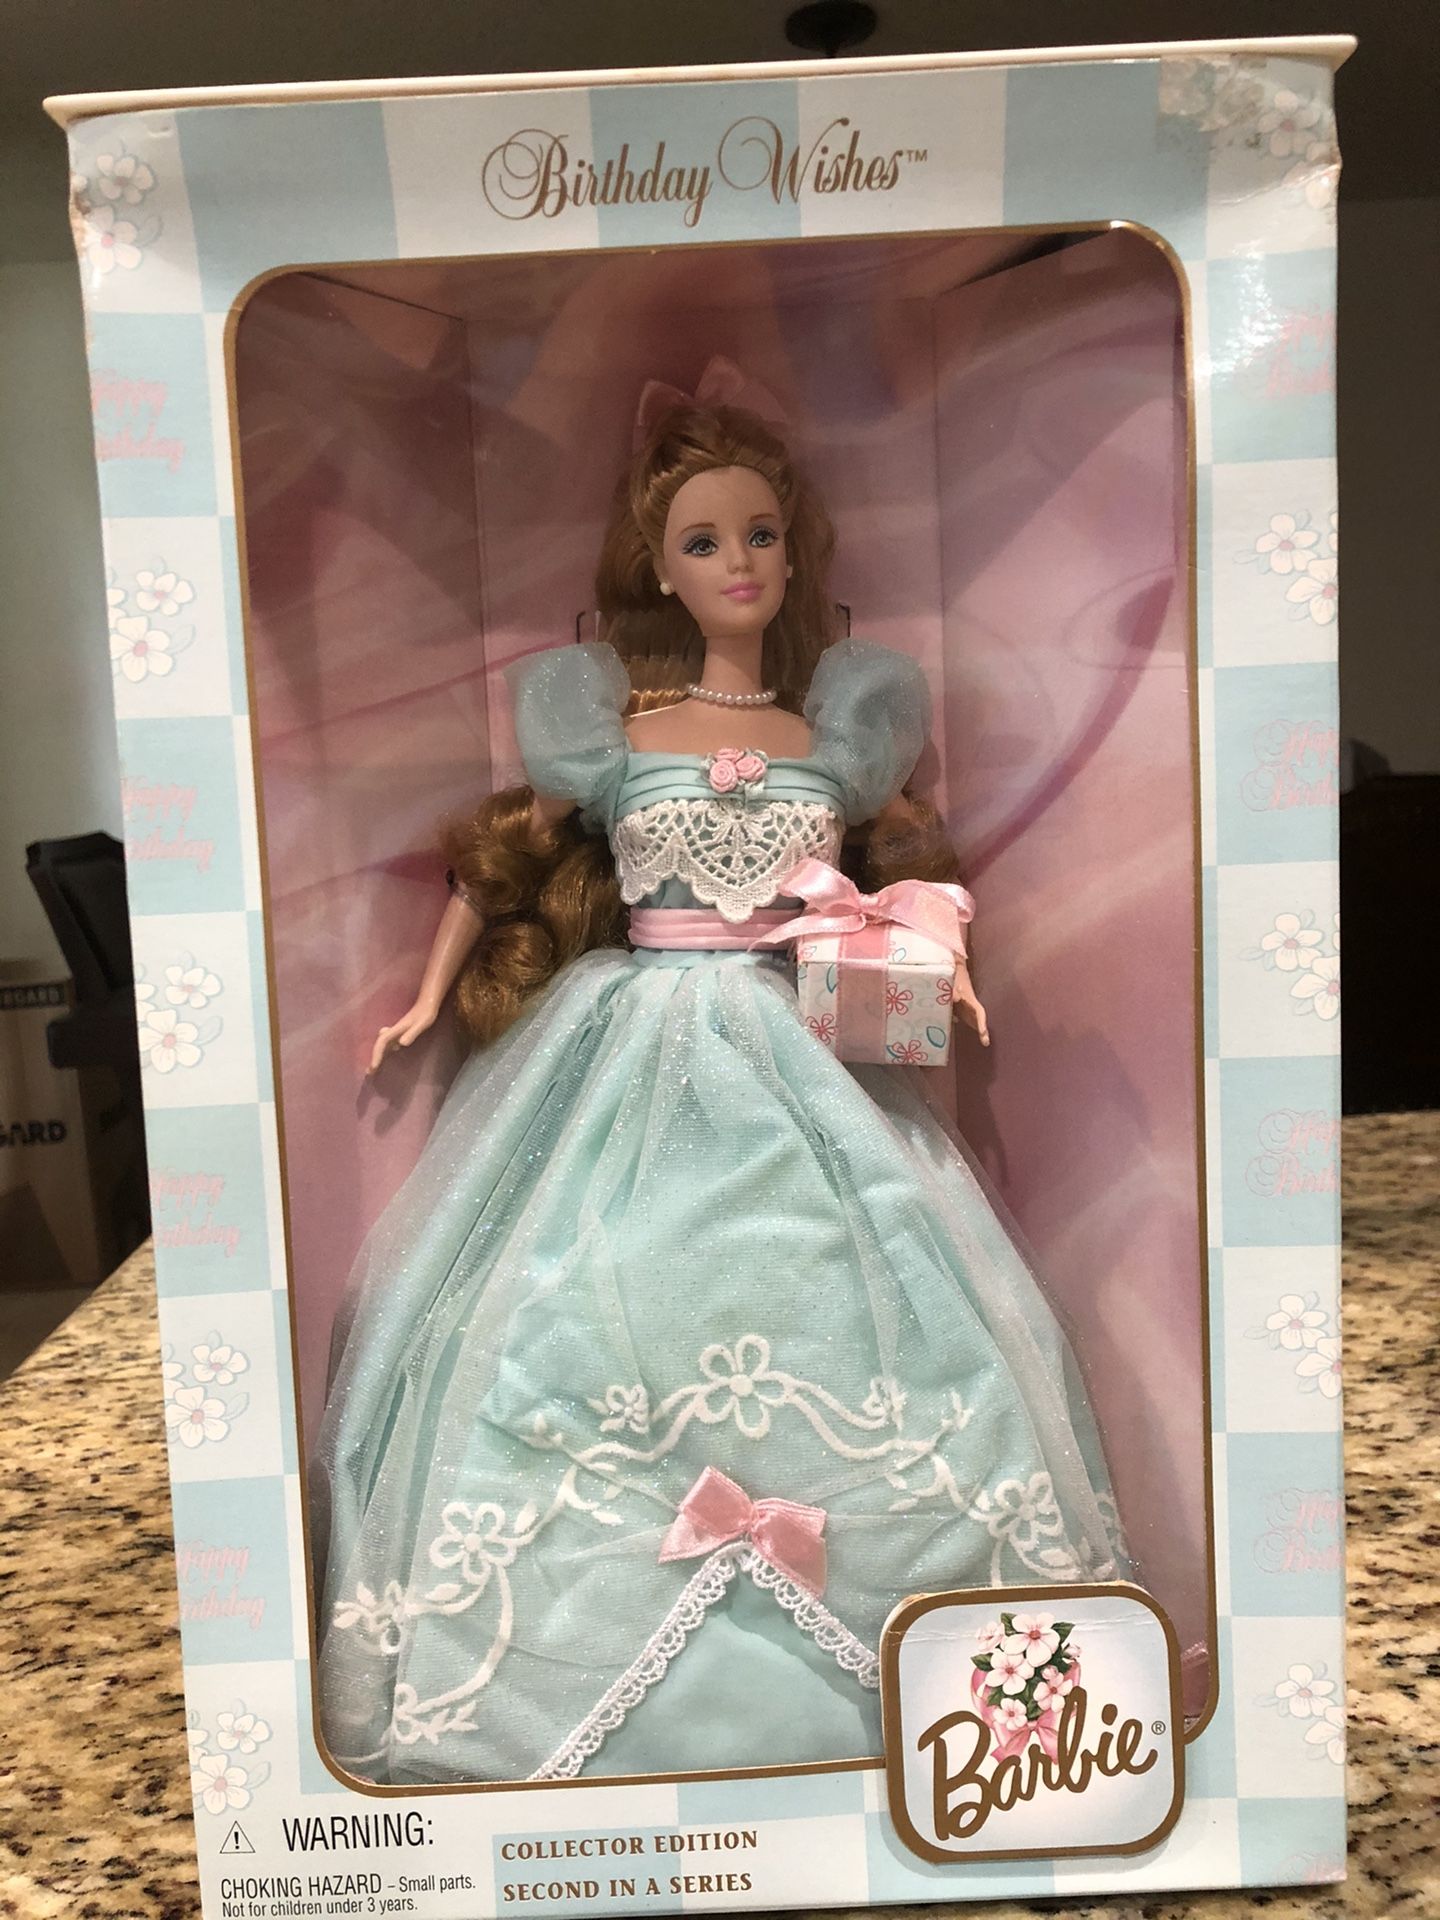 Birthday Wishes Barbie - Collector Edition - Blue